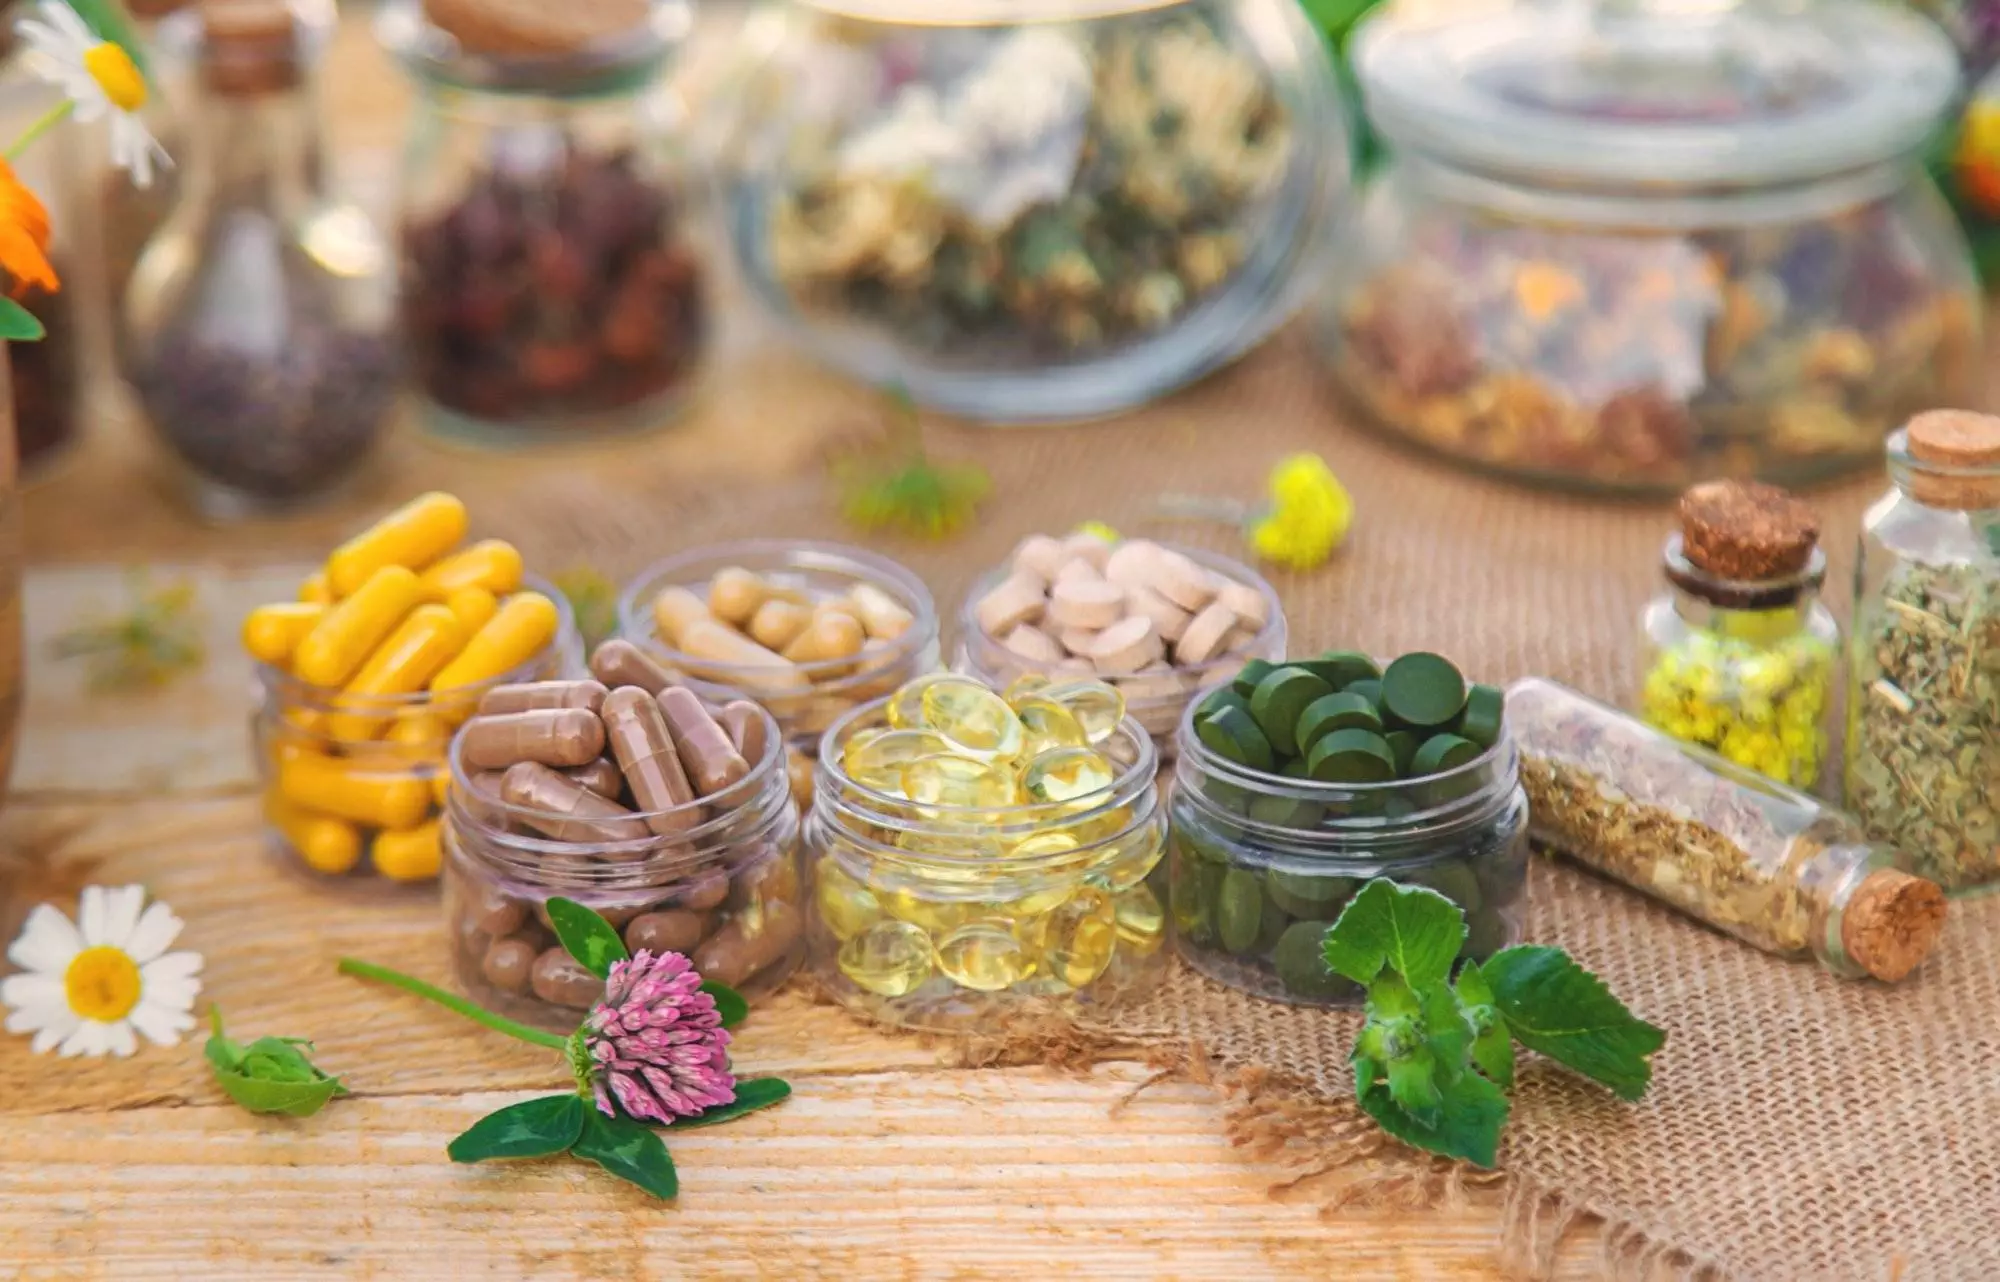 Herbal supplements and dried herbs on wooden table.